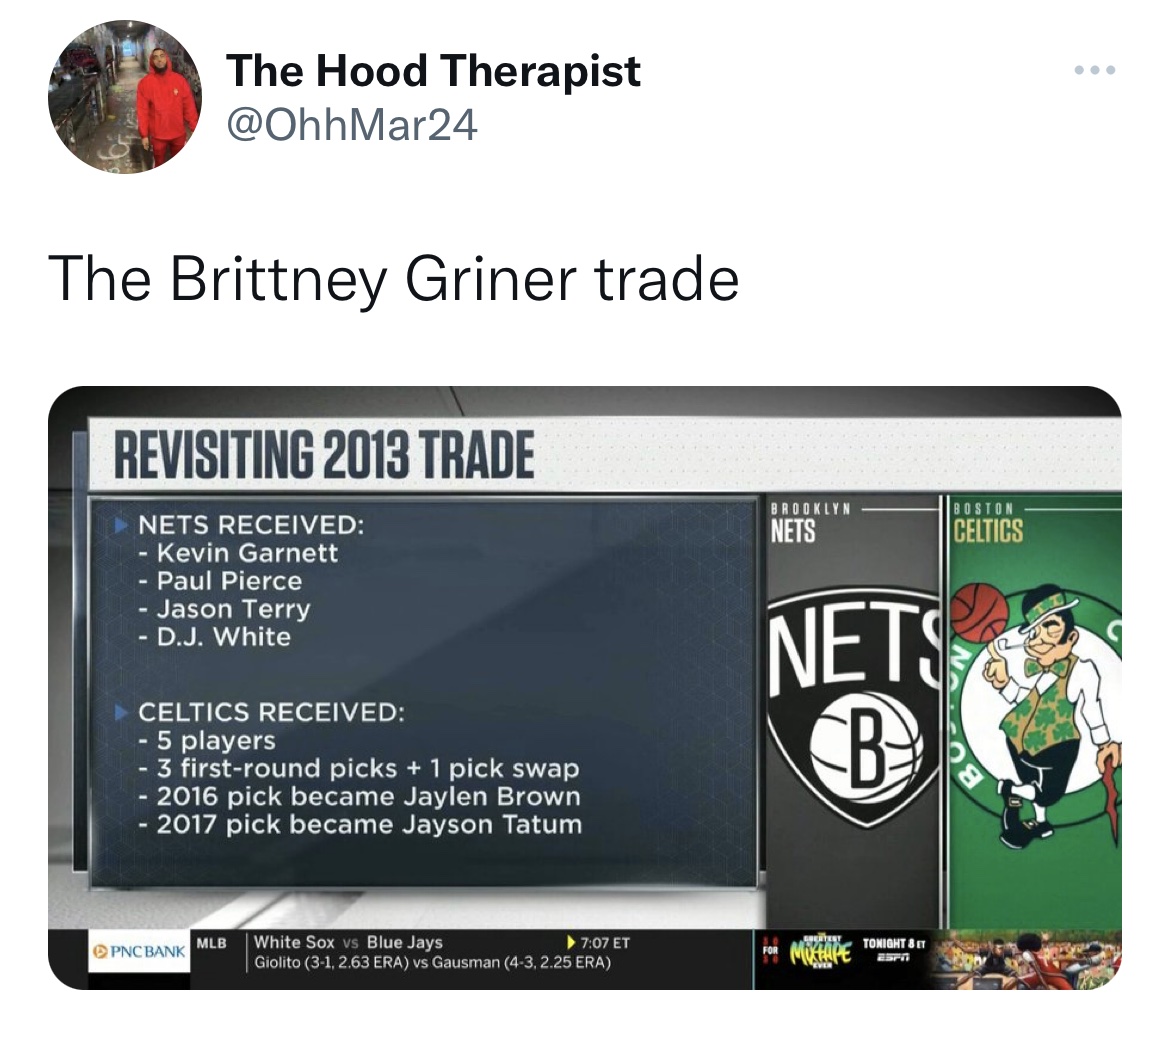 Brittney Griner Reactions - boston celtics - The Brittney Griner trade Revisiting 2013 Trade Nets Received Kevin Garnett The Hood Therapist Paul Pierce Jason Terry D.J. White Celtics Received 5 players 3 firstround picks 1 pick swap 2016 pick became Jayle